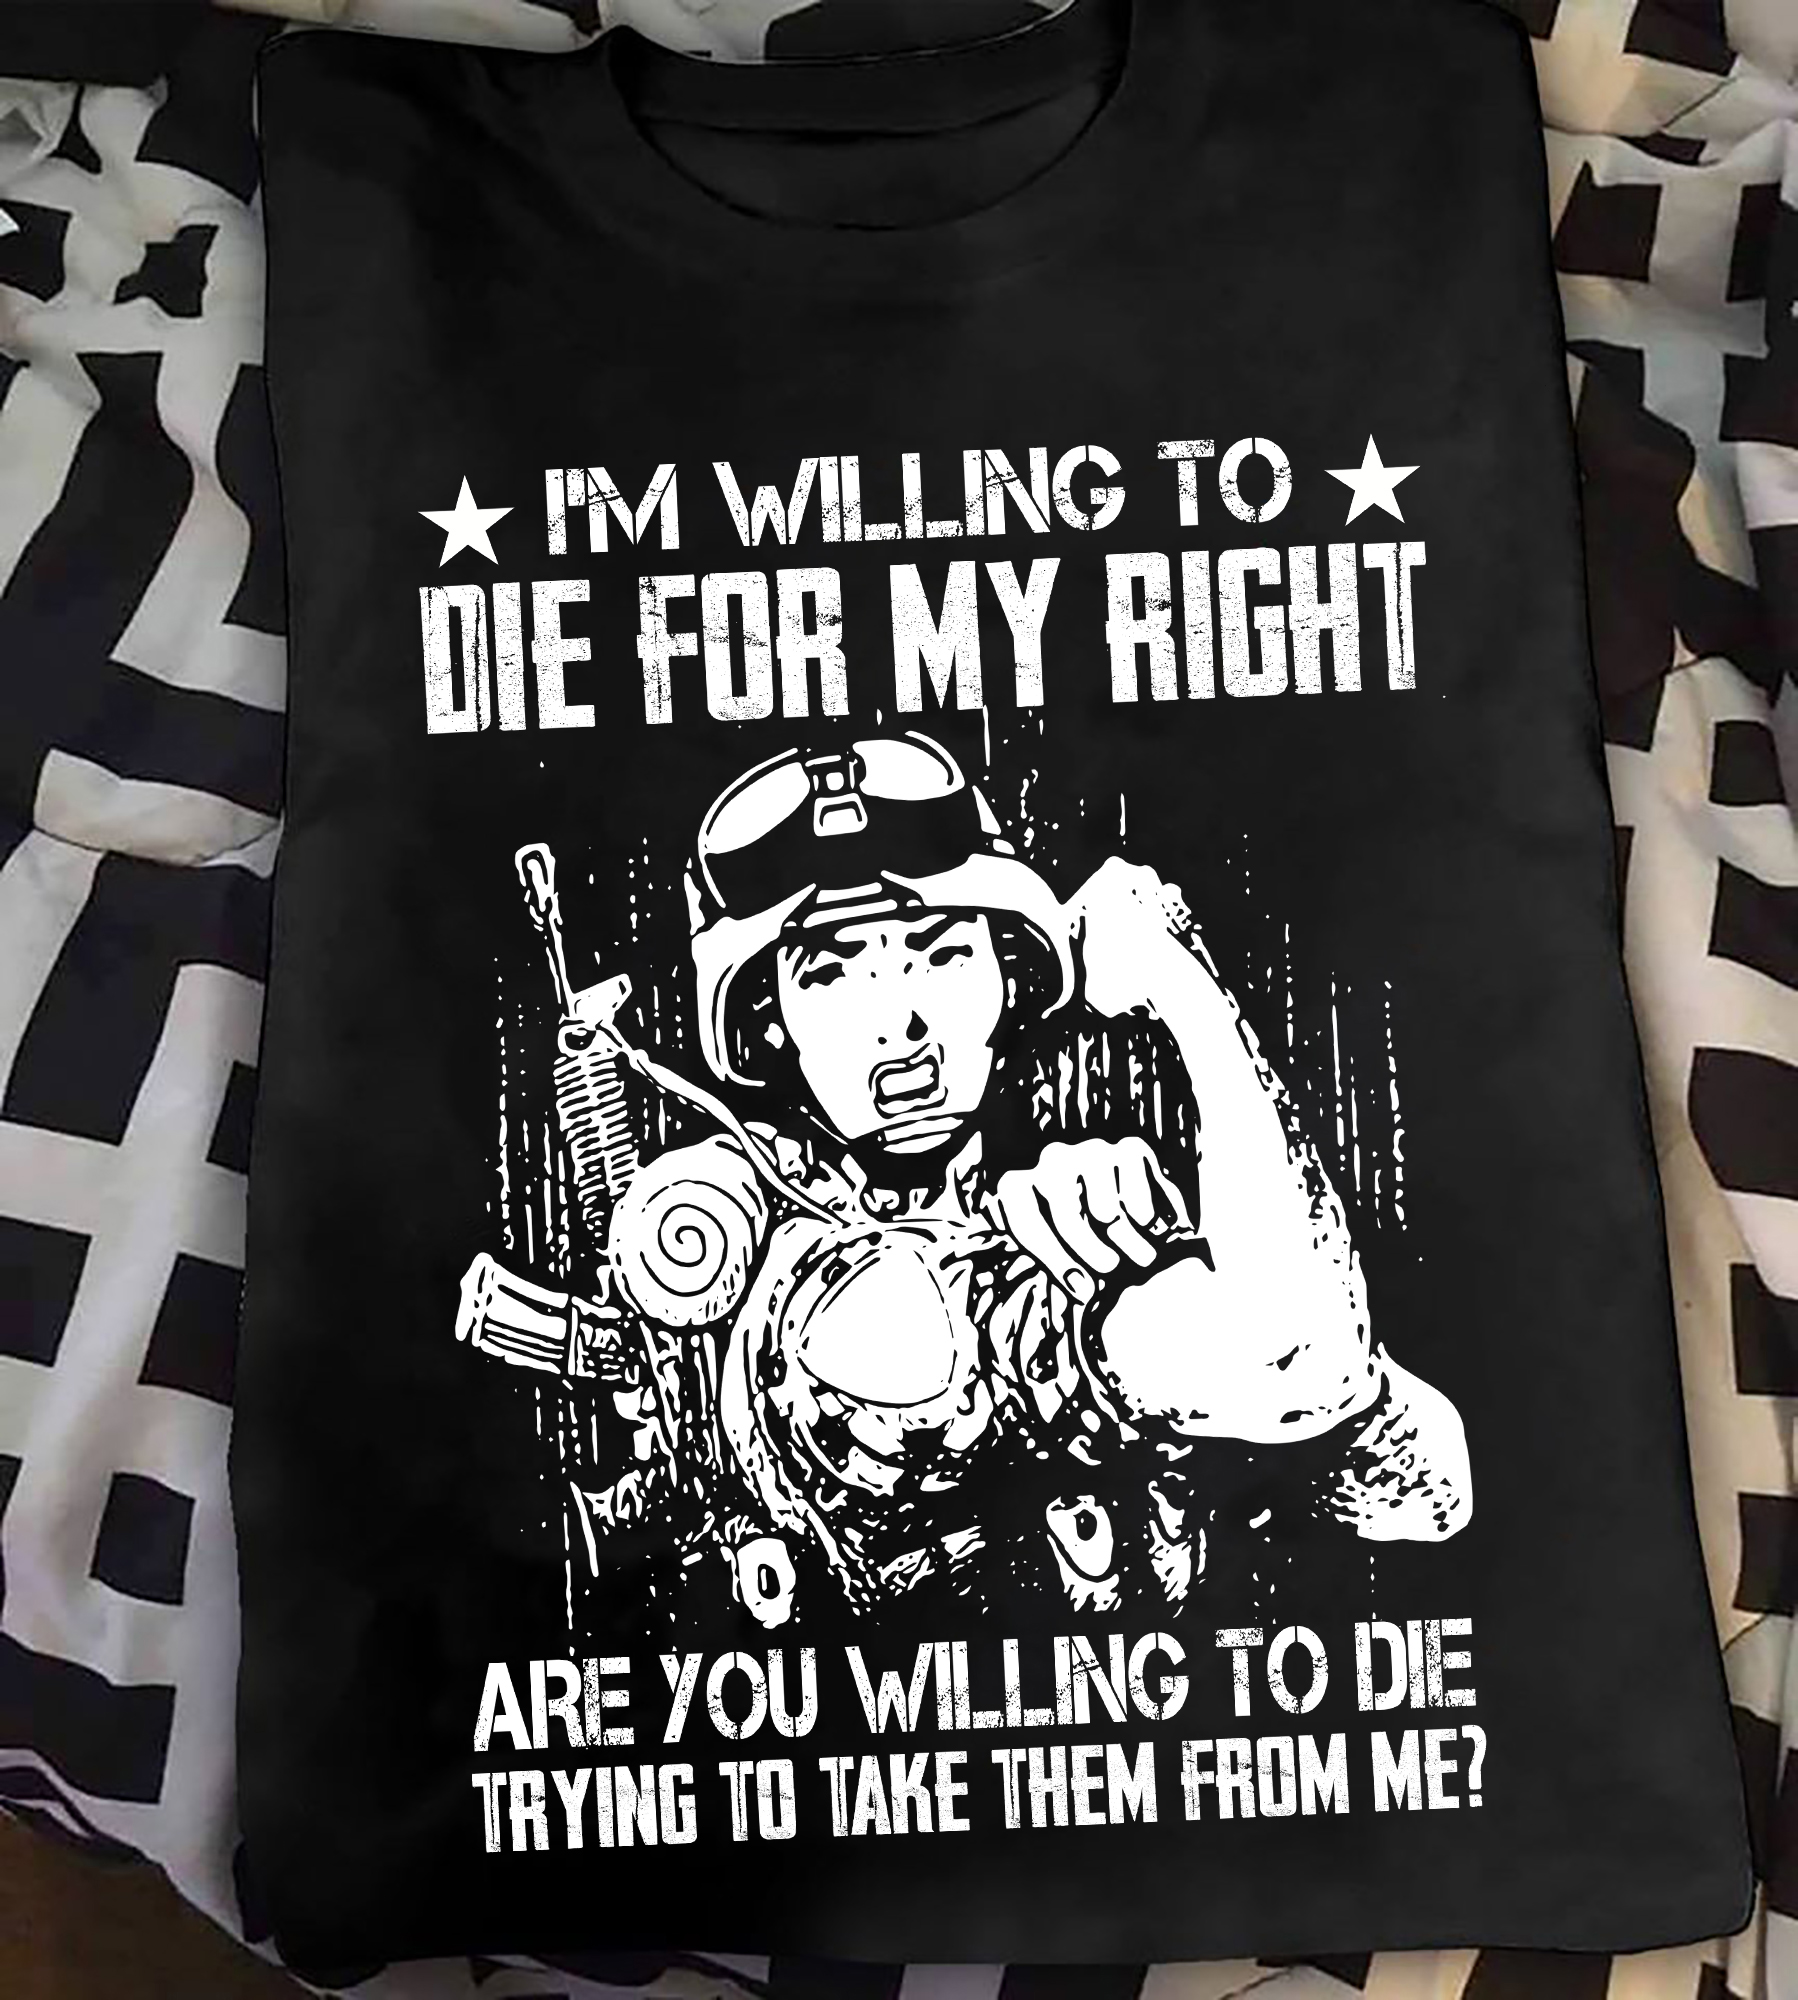 I'm willing to die for my rights are you willing to die trying to take them from me - Grumpy veteran